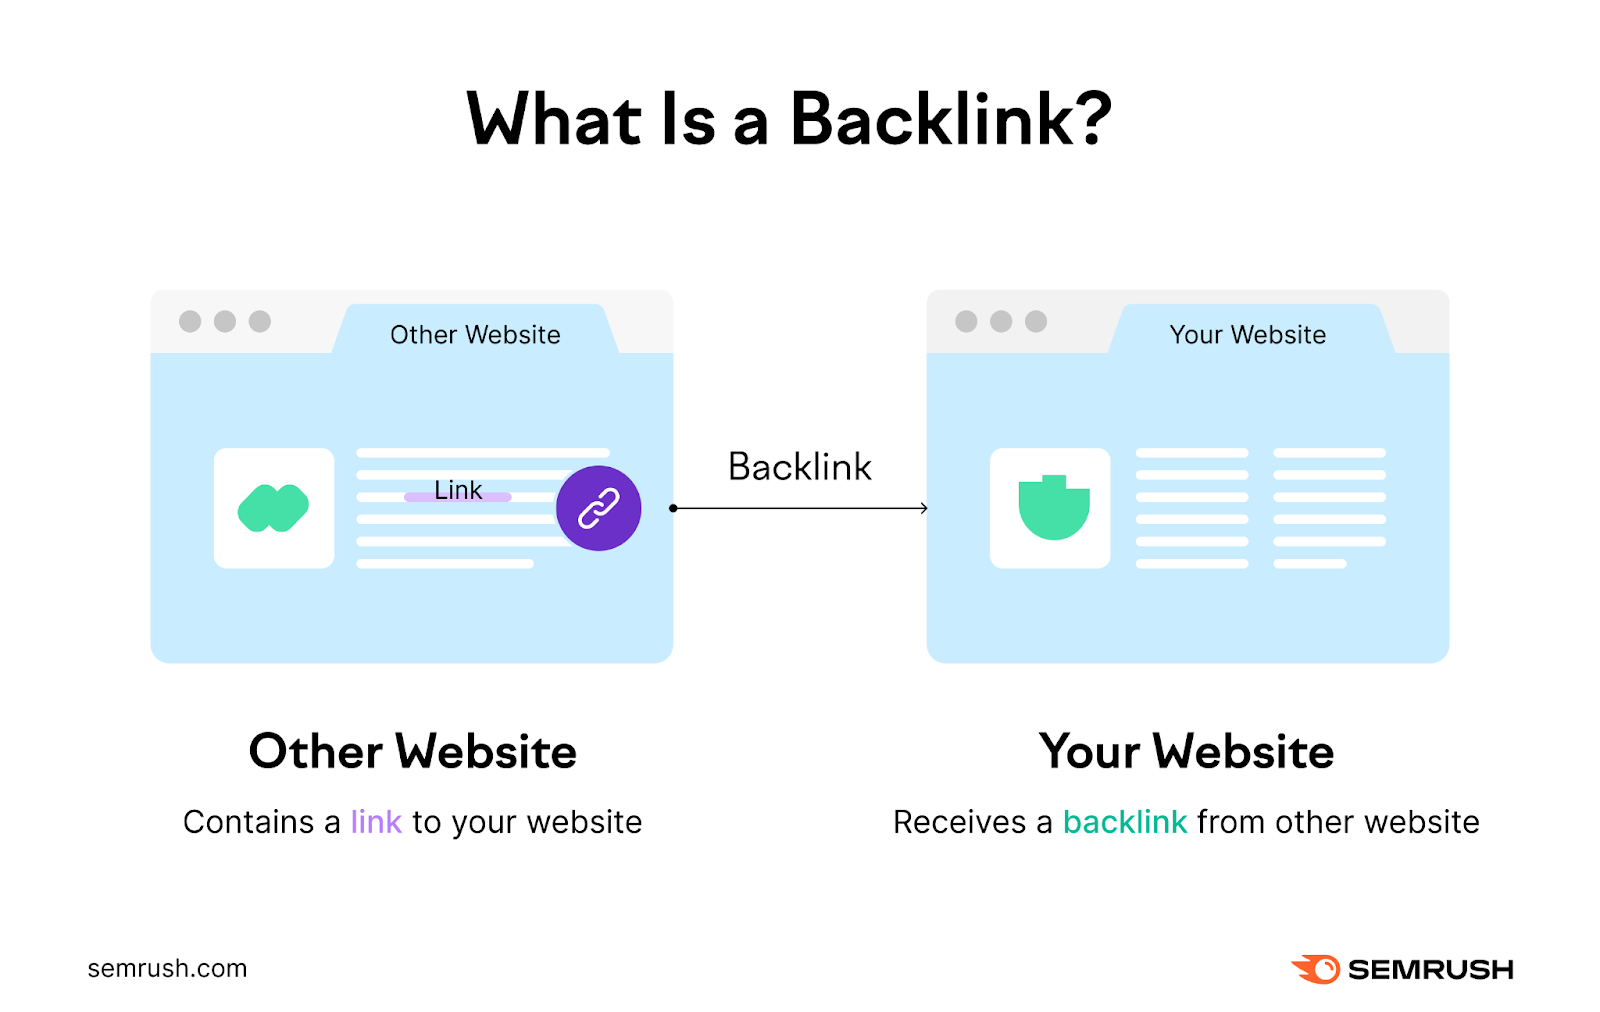 An image showing what a backlink is